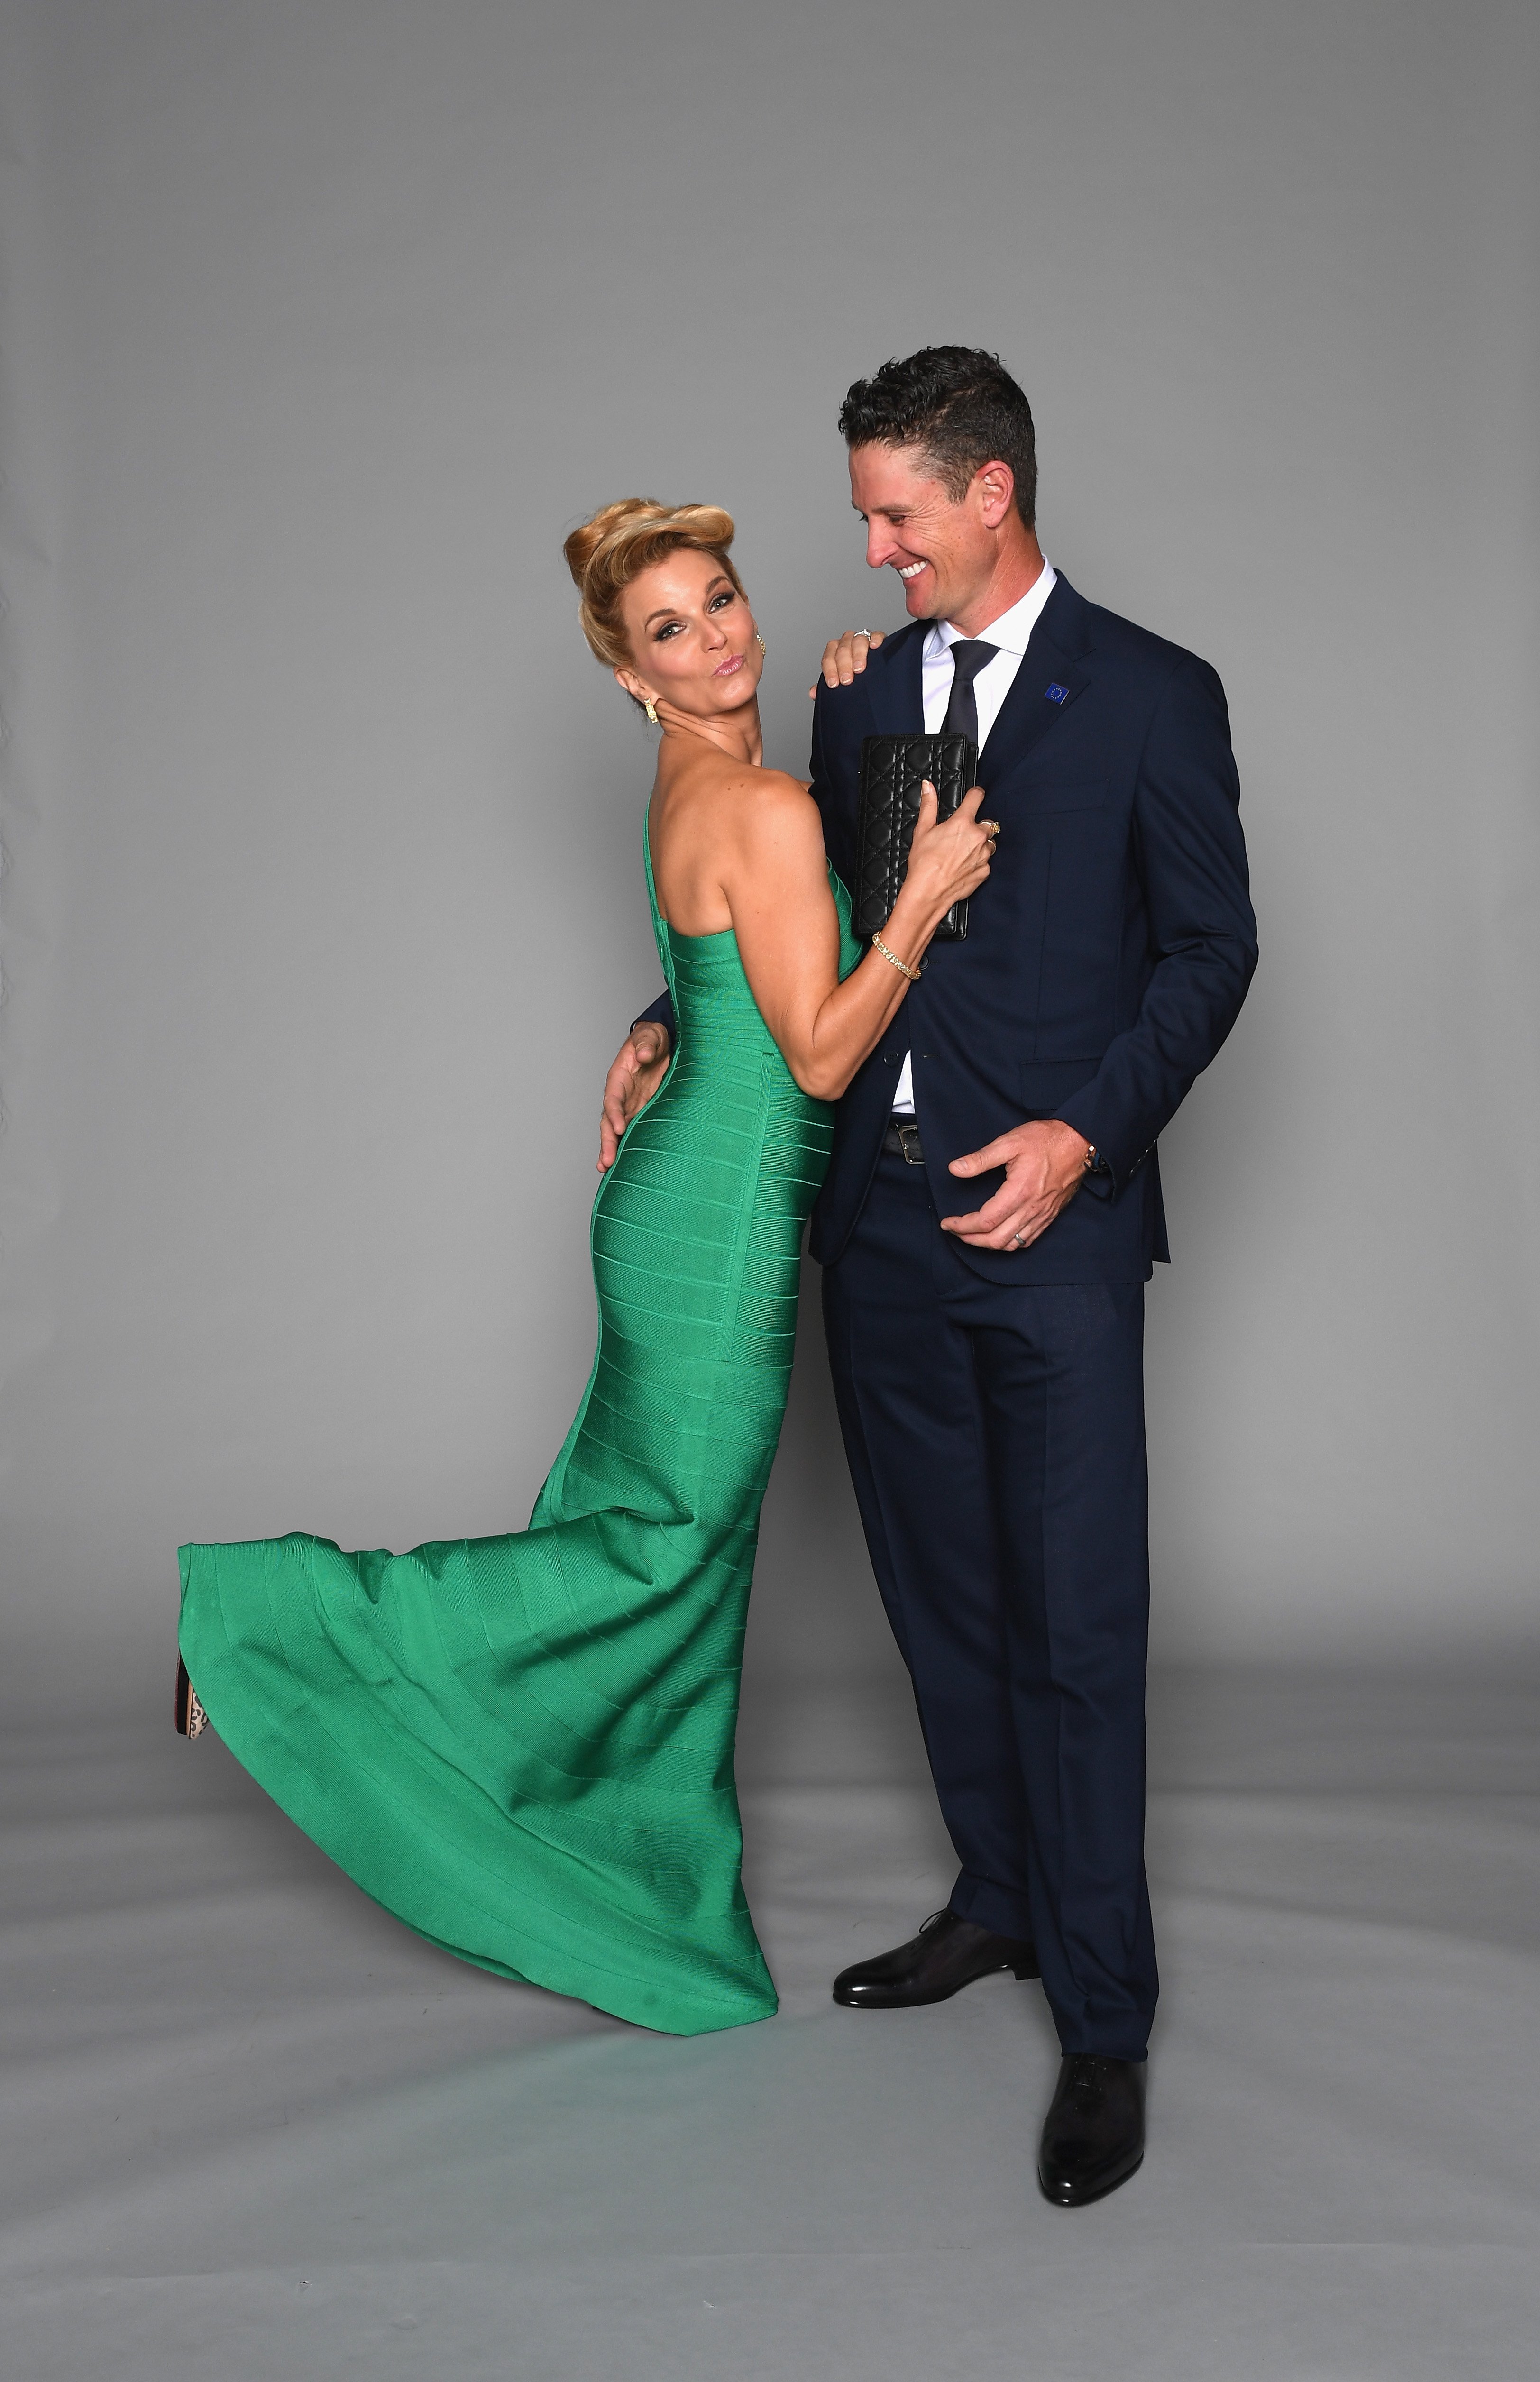 Justin Rose having fun while doing different poses with his wife Kate Rose prior to the 2018 Ryder Cup Gala